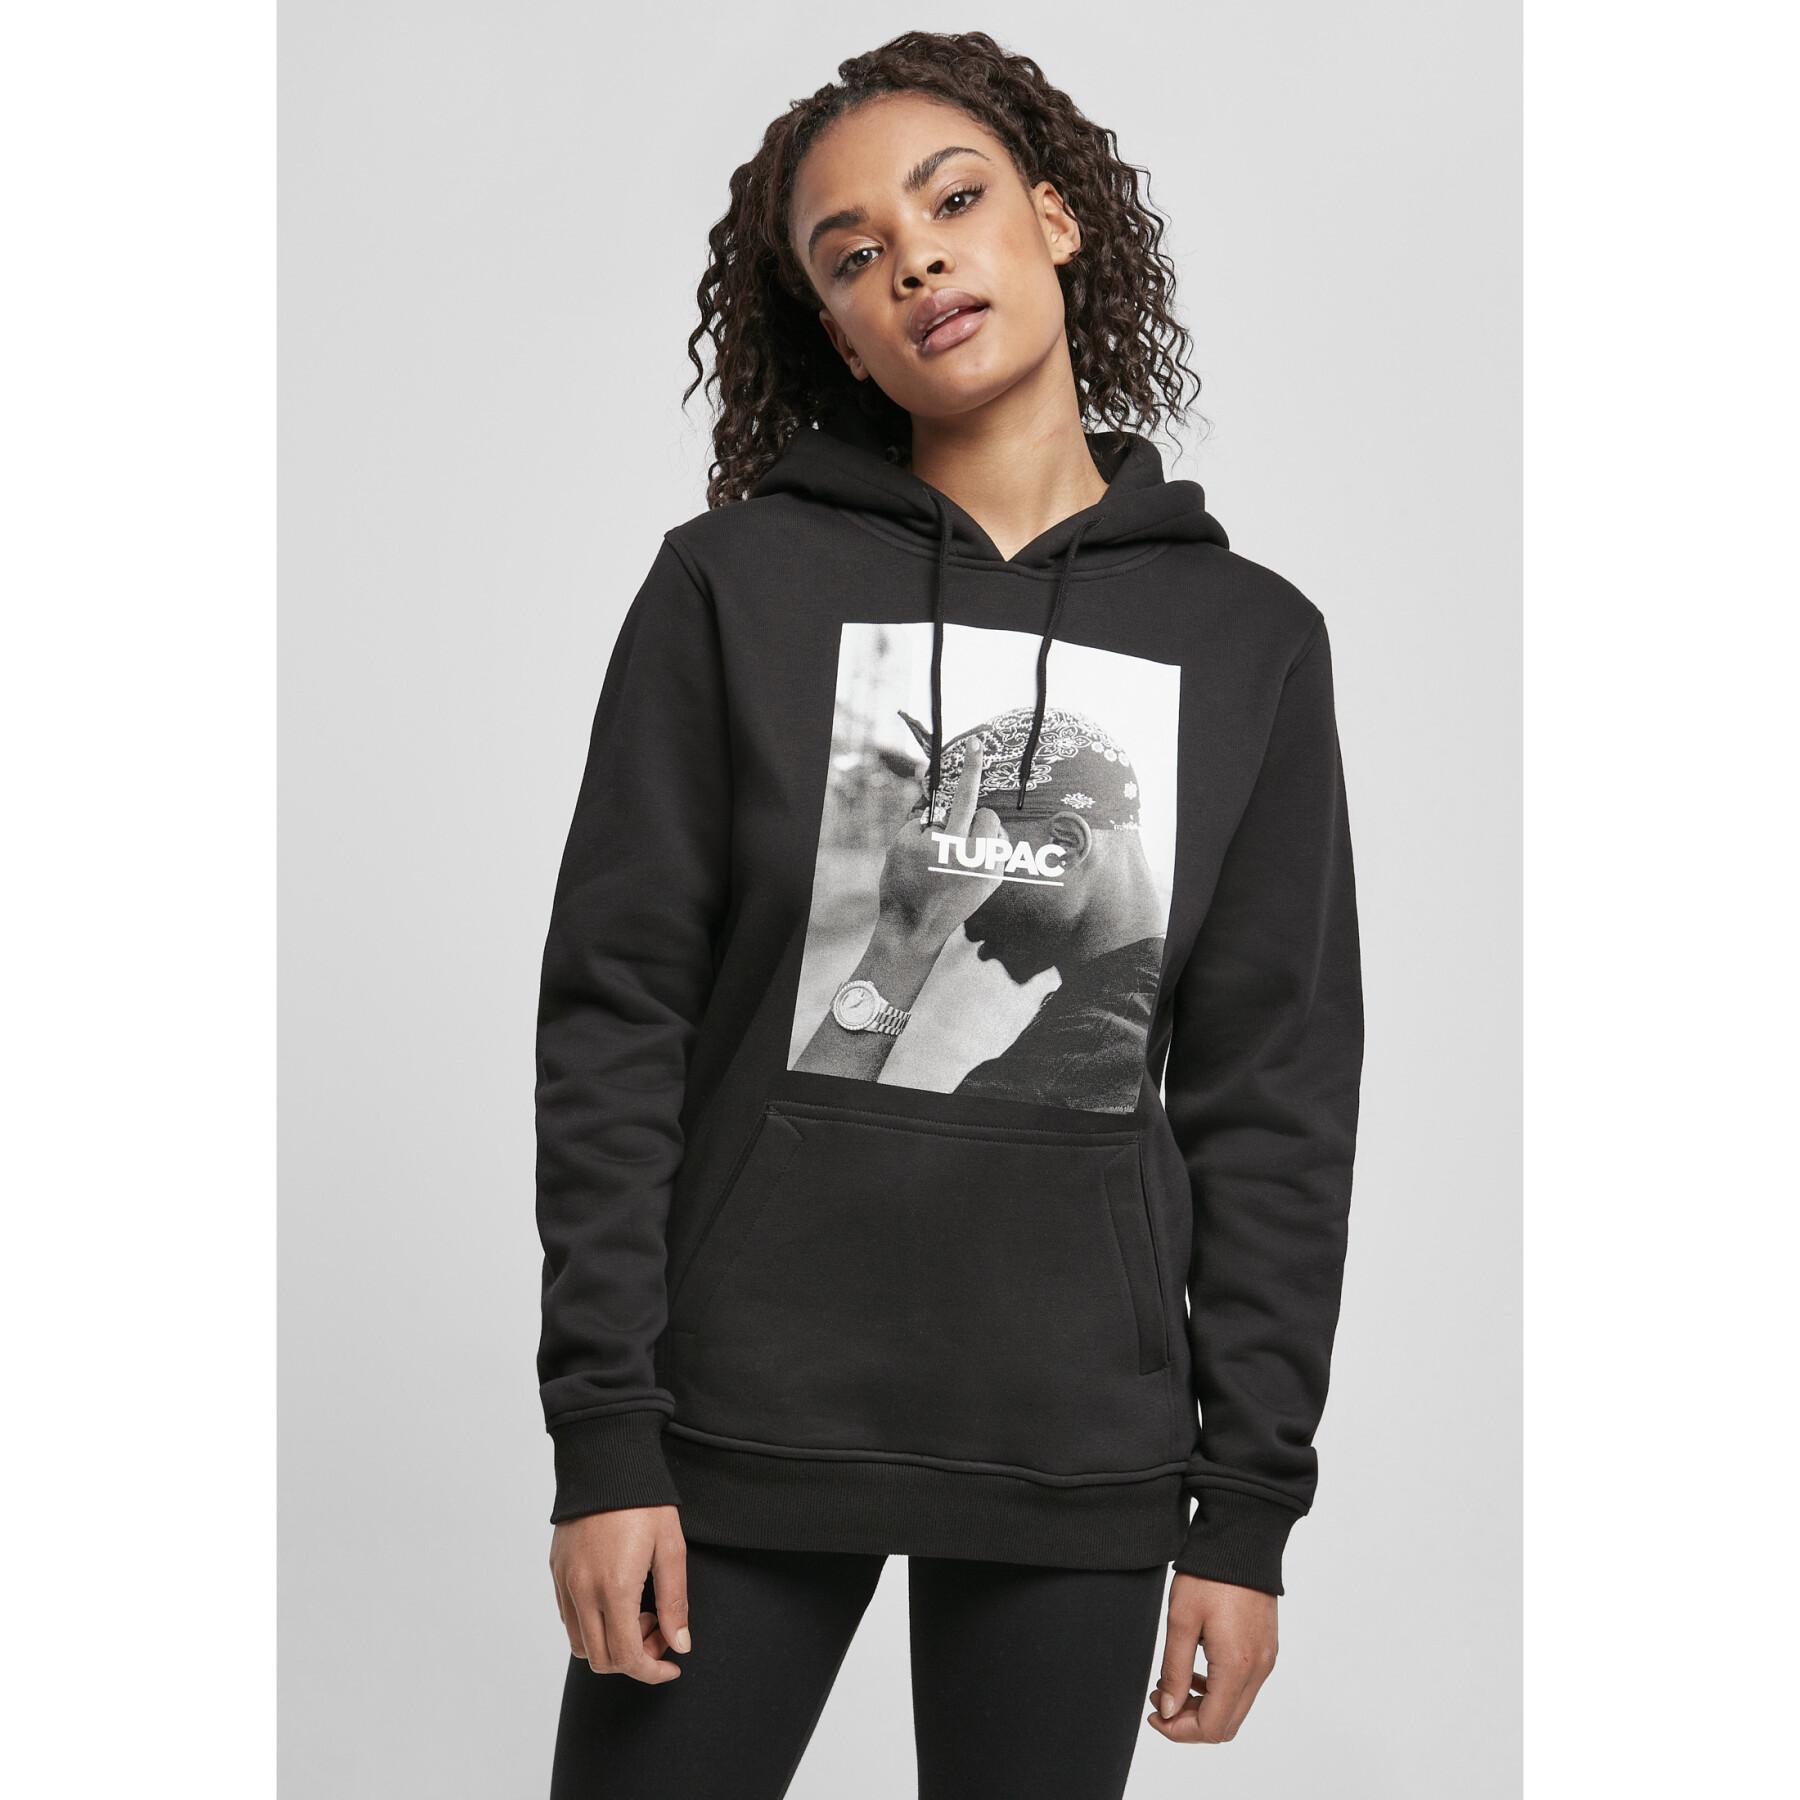 Women's hoodie Mister Tee 2pac f*ck the world (Large sizes)